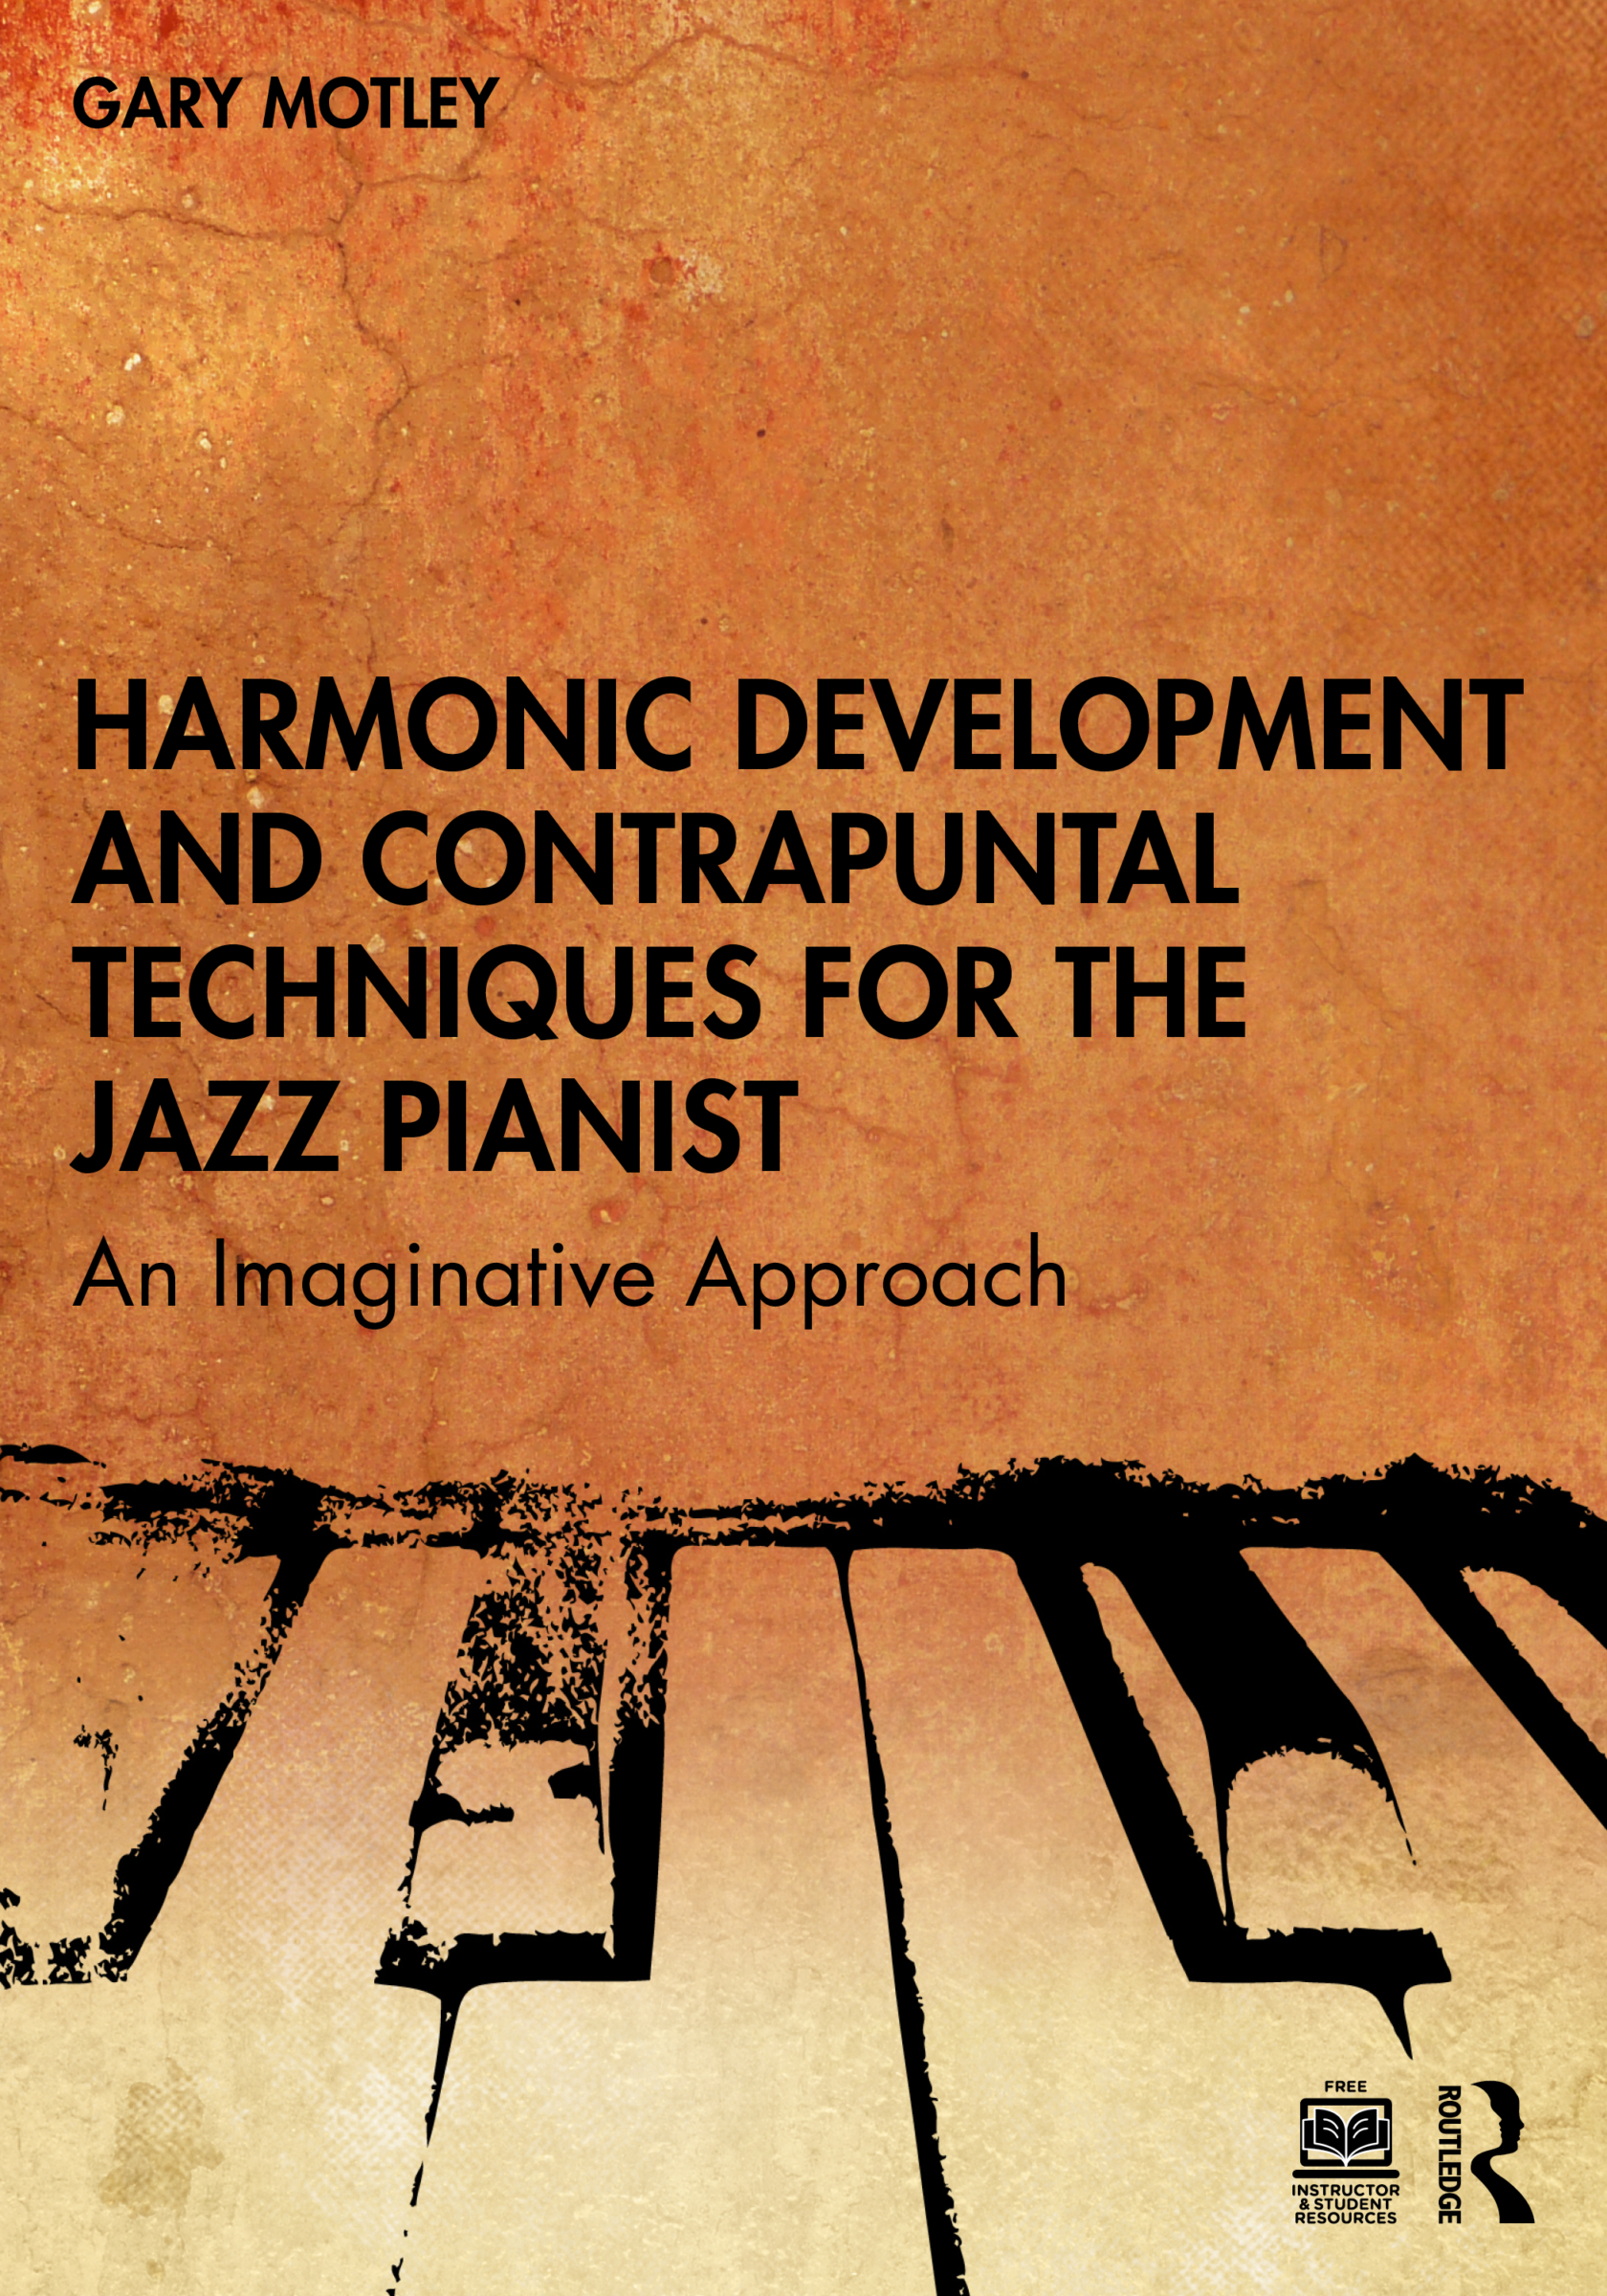 Book Cover for Gary Motley's book Harmonic Development and Contrapuntal Techniques for the Jazz Pianist